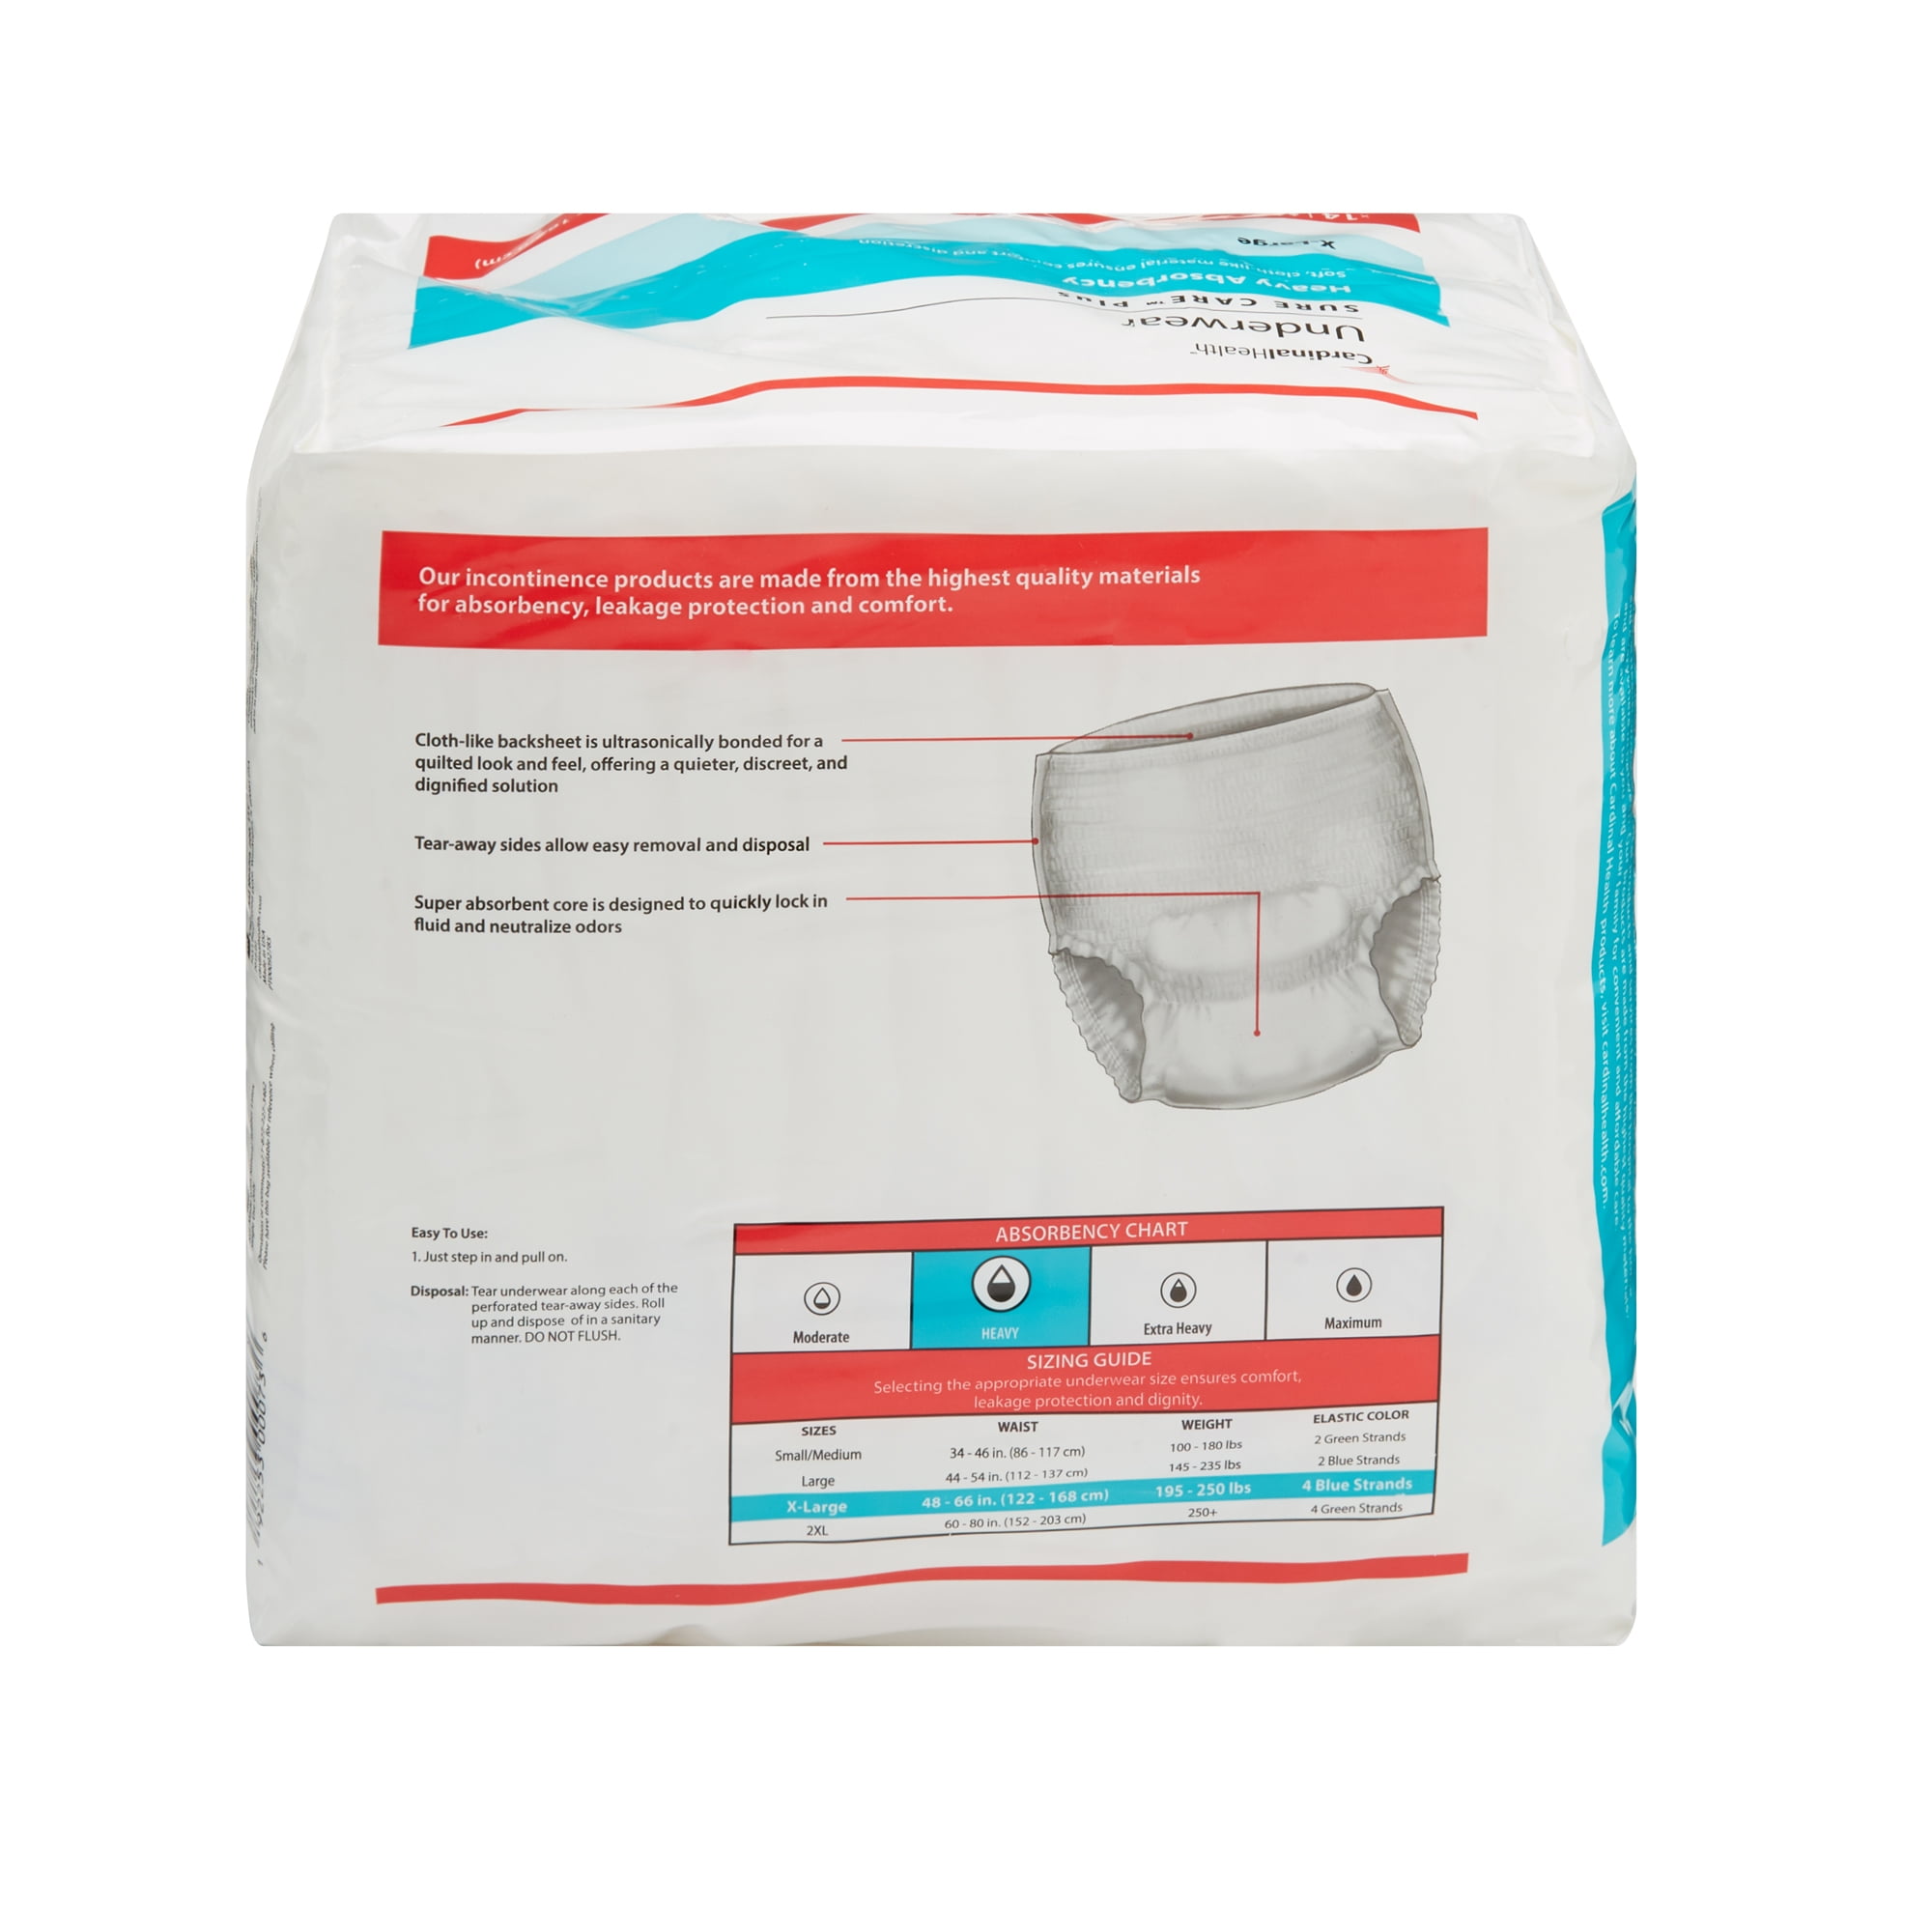 Cardinal Health Sure Care Extra Protective Underwear Moderate Absorbency -  M, L, XL